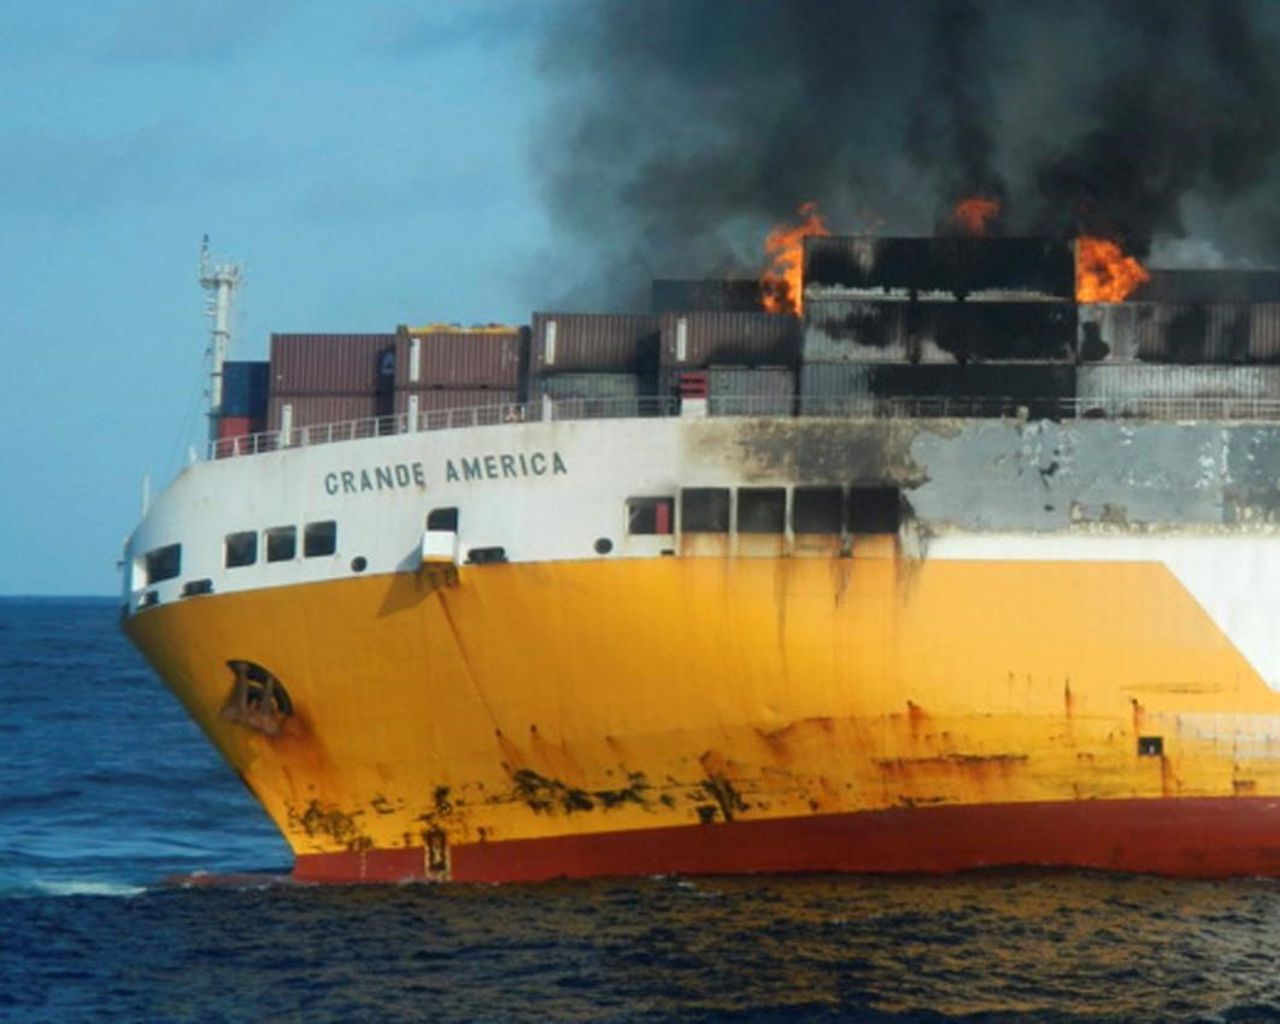 Insurer TT Club says one major containership fire occurs every 60 days